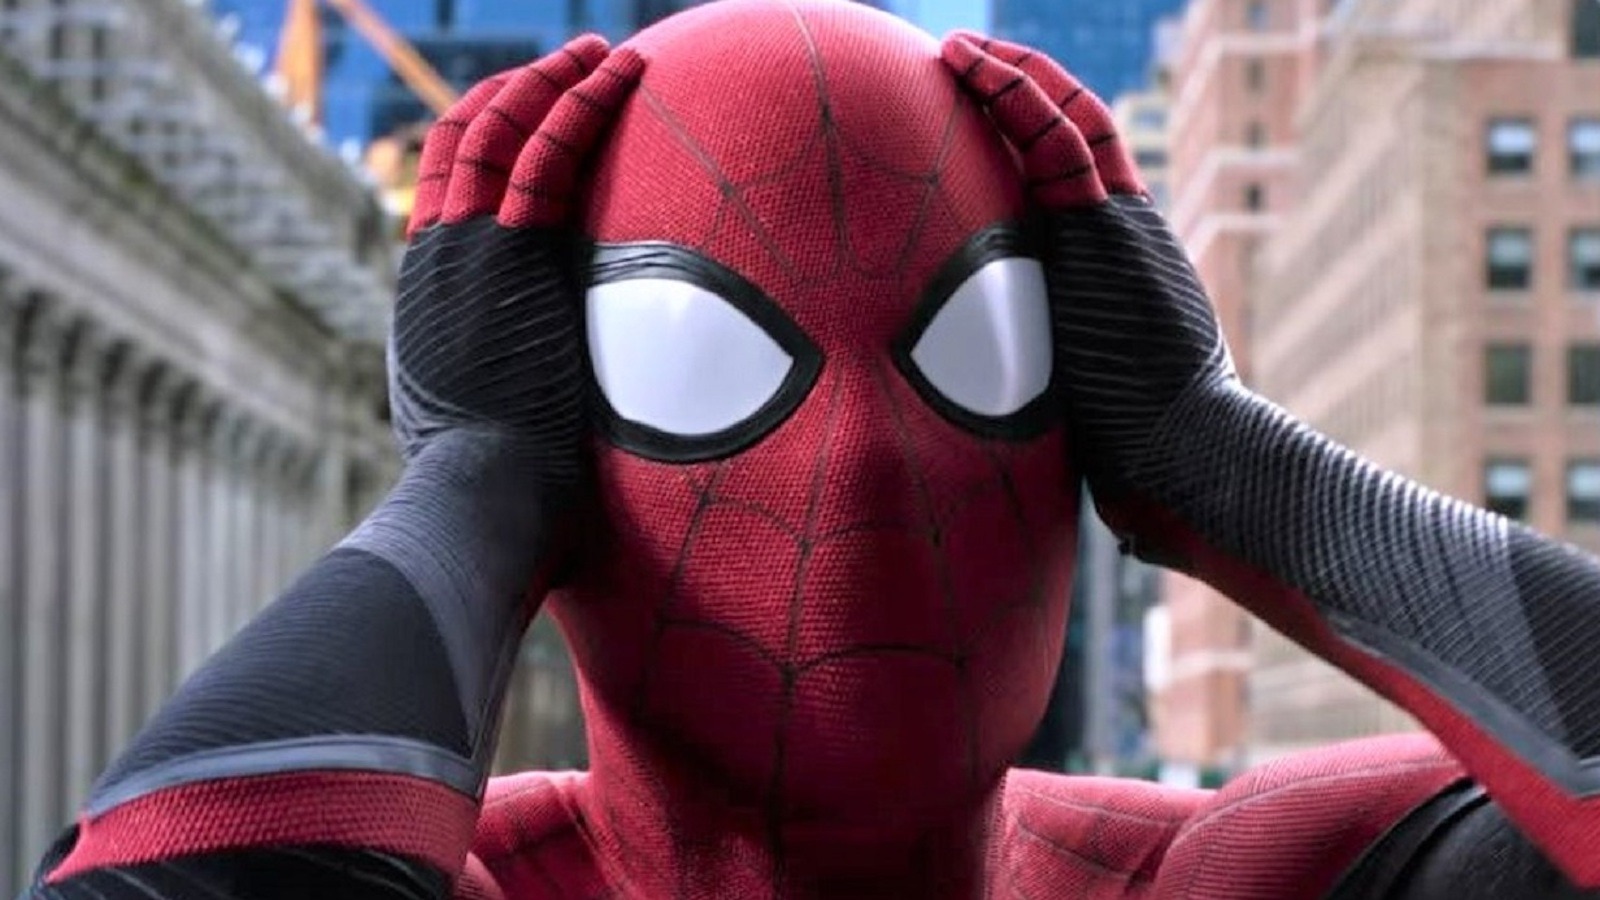 Fans Are Losing Their Minds Over The Spider-Man: No Way Home Trailer